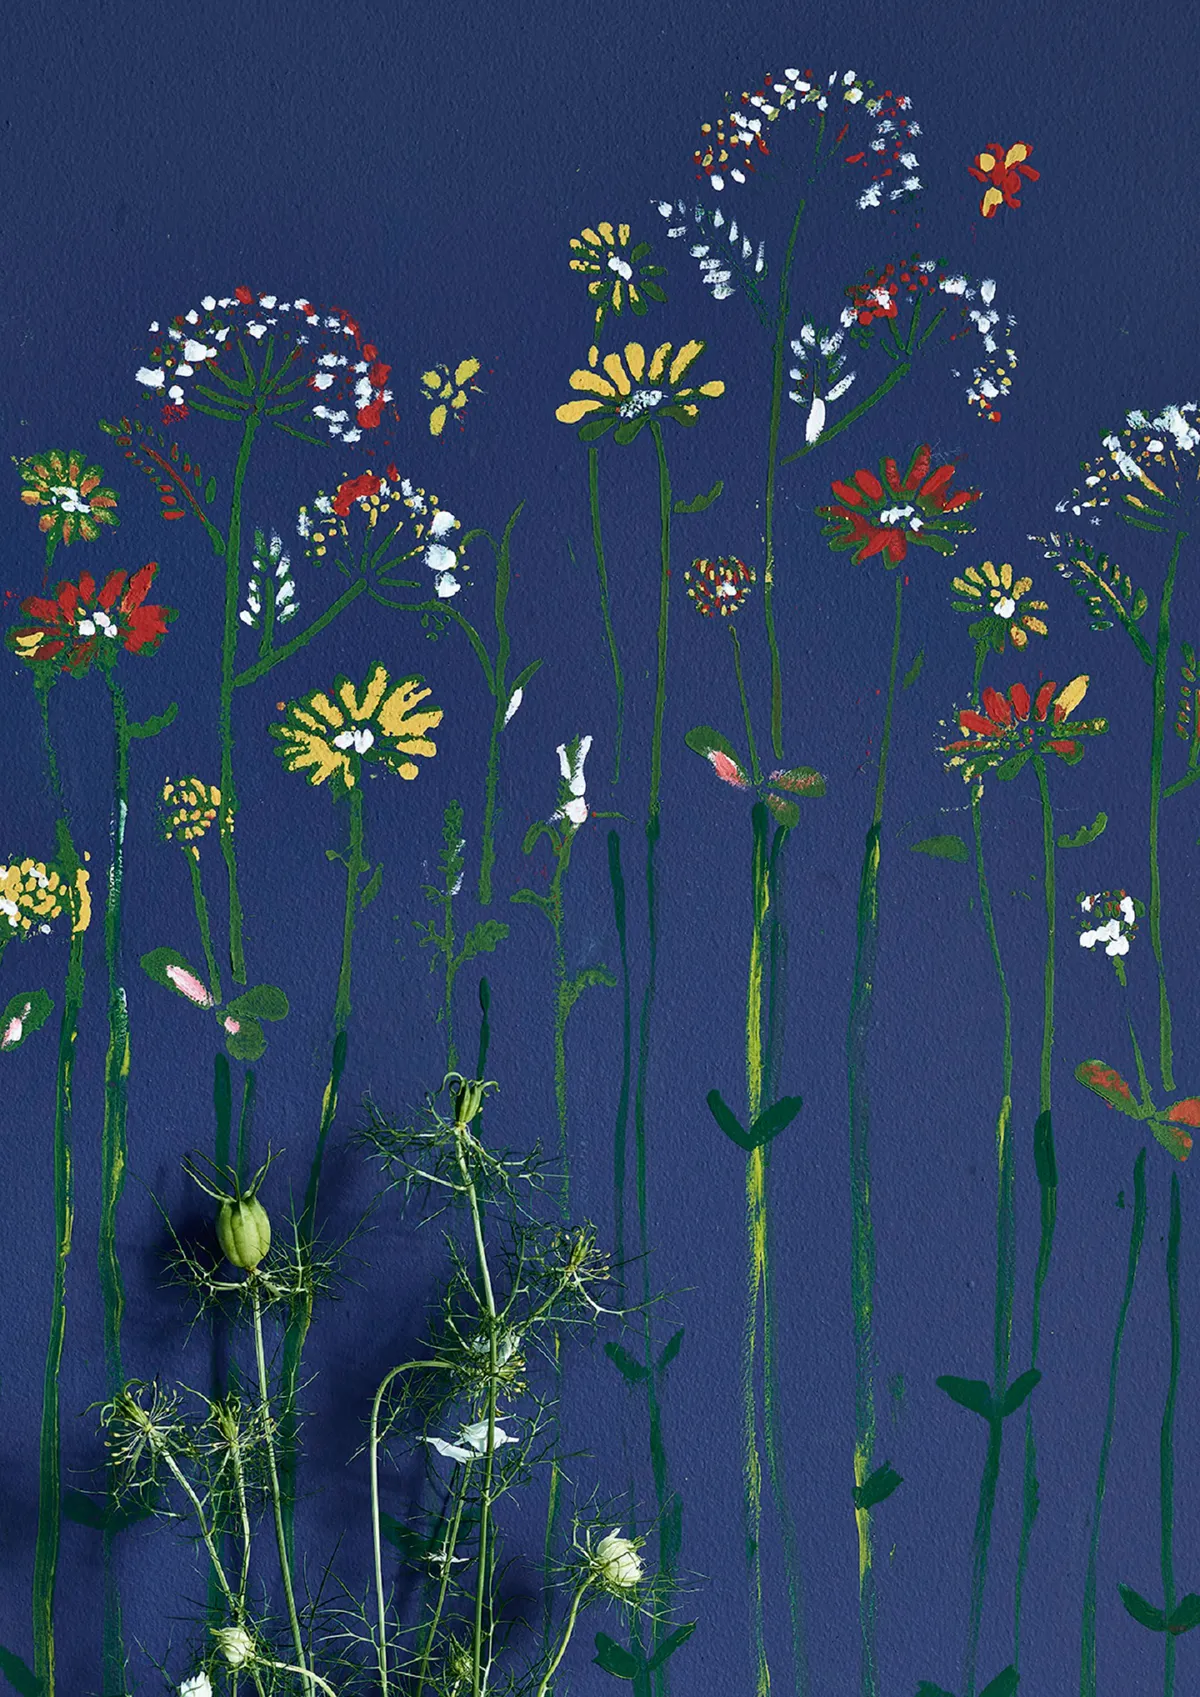 Meadow Flowers stencil, £17.95; walls painted in Napoleonic Blue, £41.95 for 2.5L; stencilled flowers painted in a selection of chalk paint, from £5.95 for 120ml, all Annie Sloan